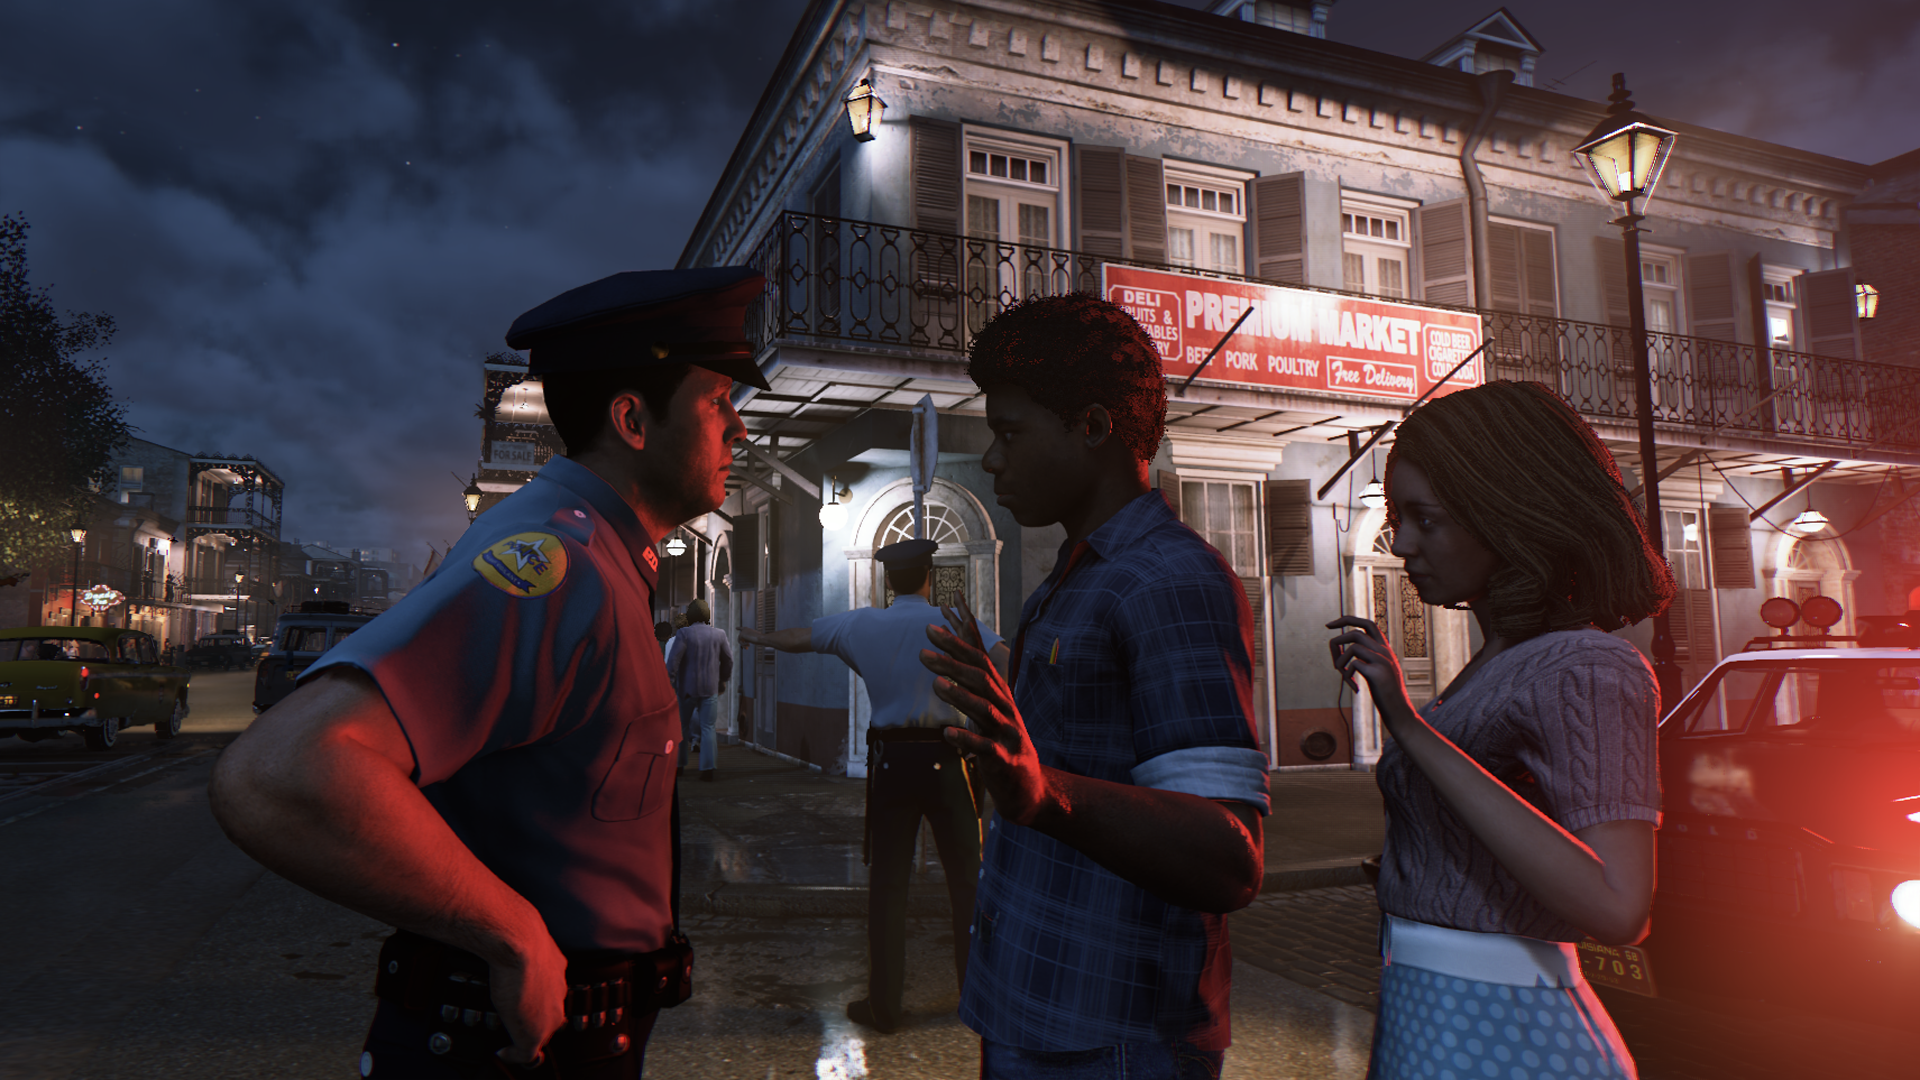 Mafia 3 Dev Talks Connections to Mafia 2 and Why Sensationalize Racism - GameSpot